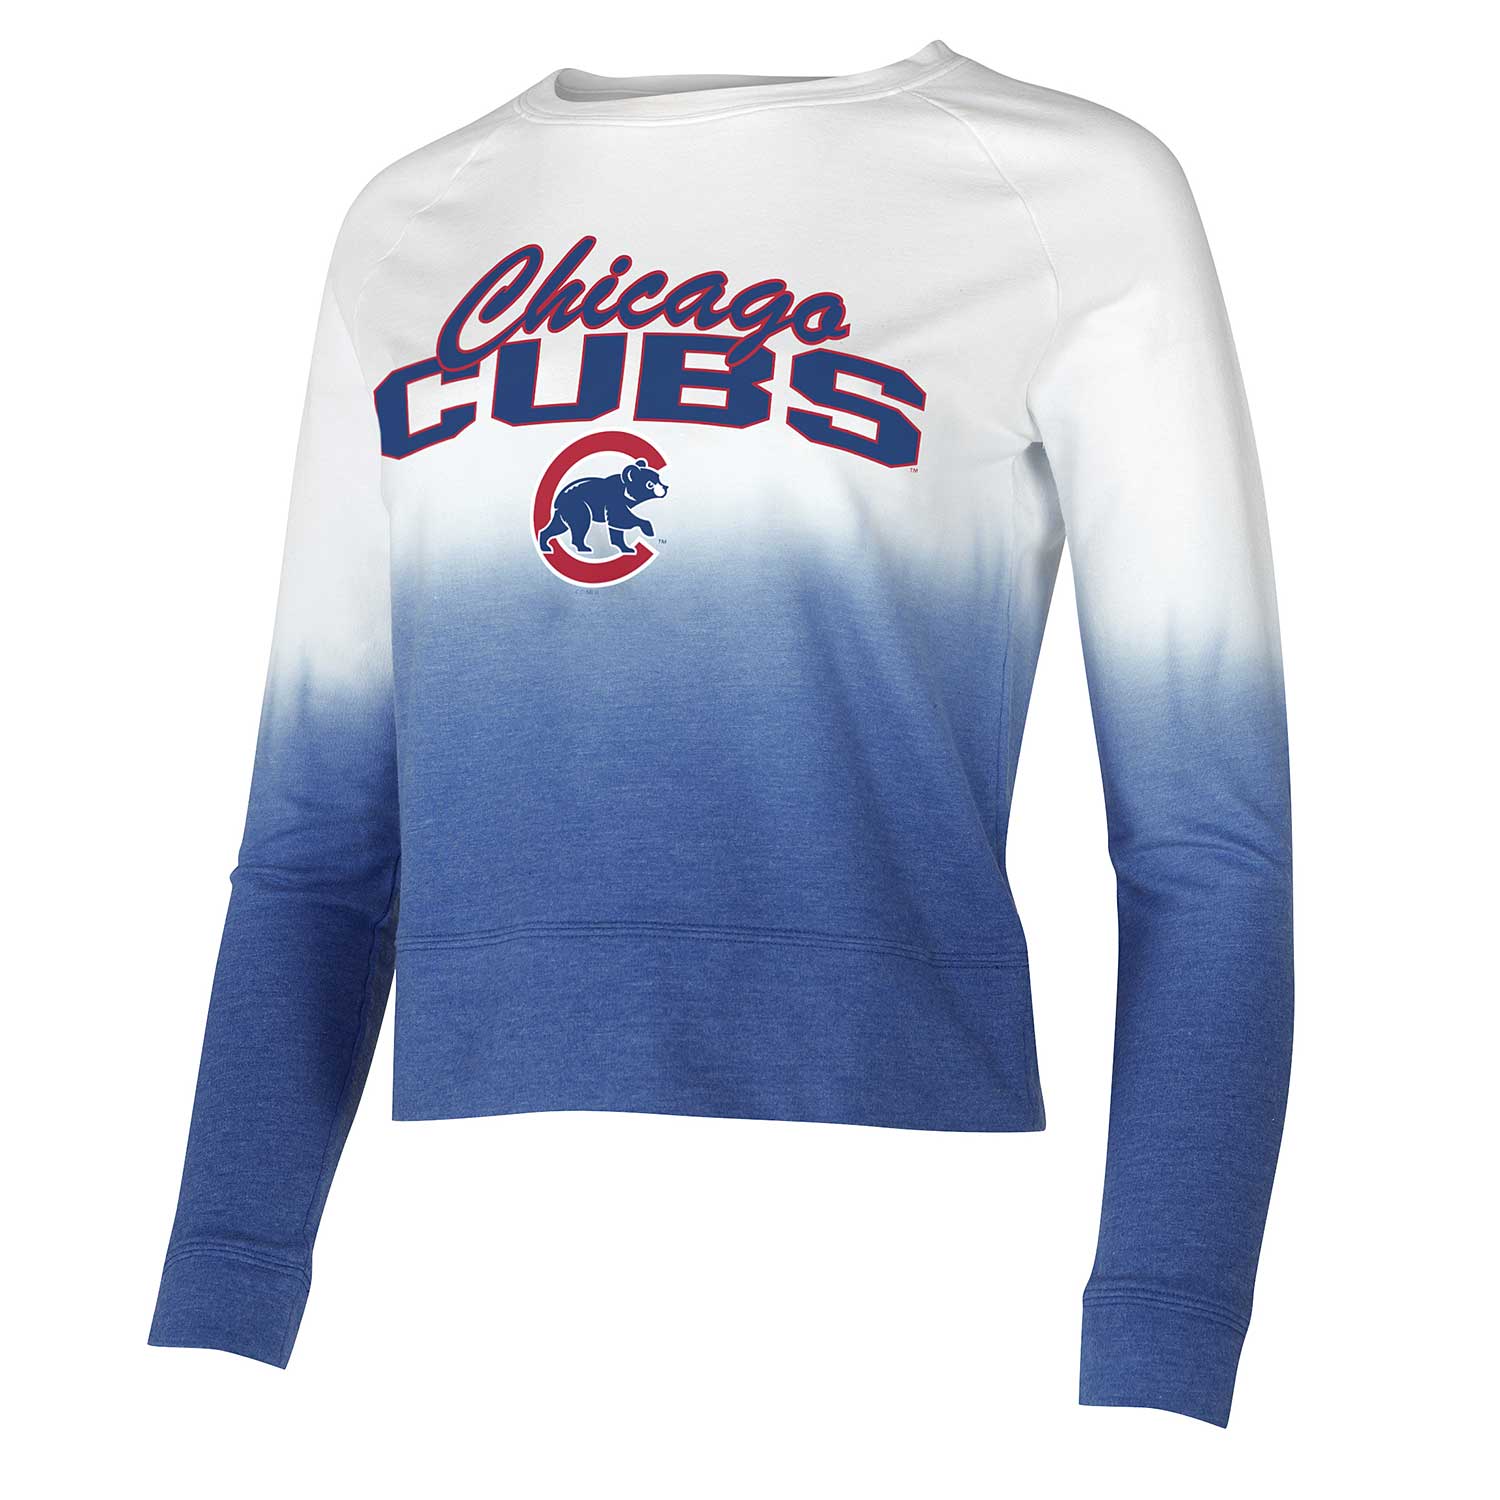 Official Women's Chicago Cubs Gear, Womens Cubs Apparel, Ladies Cubs  Outfits